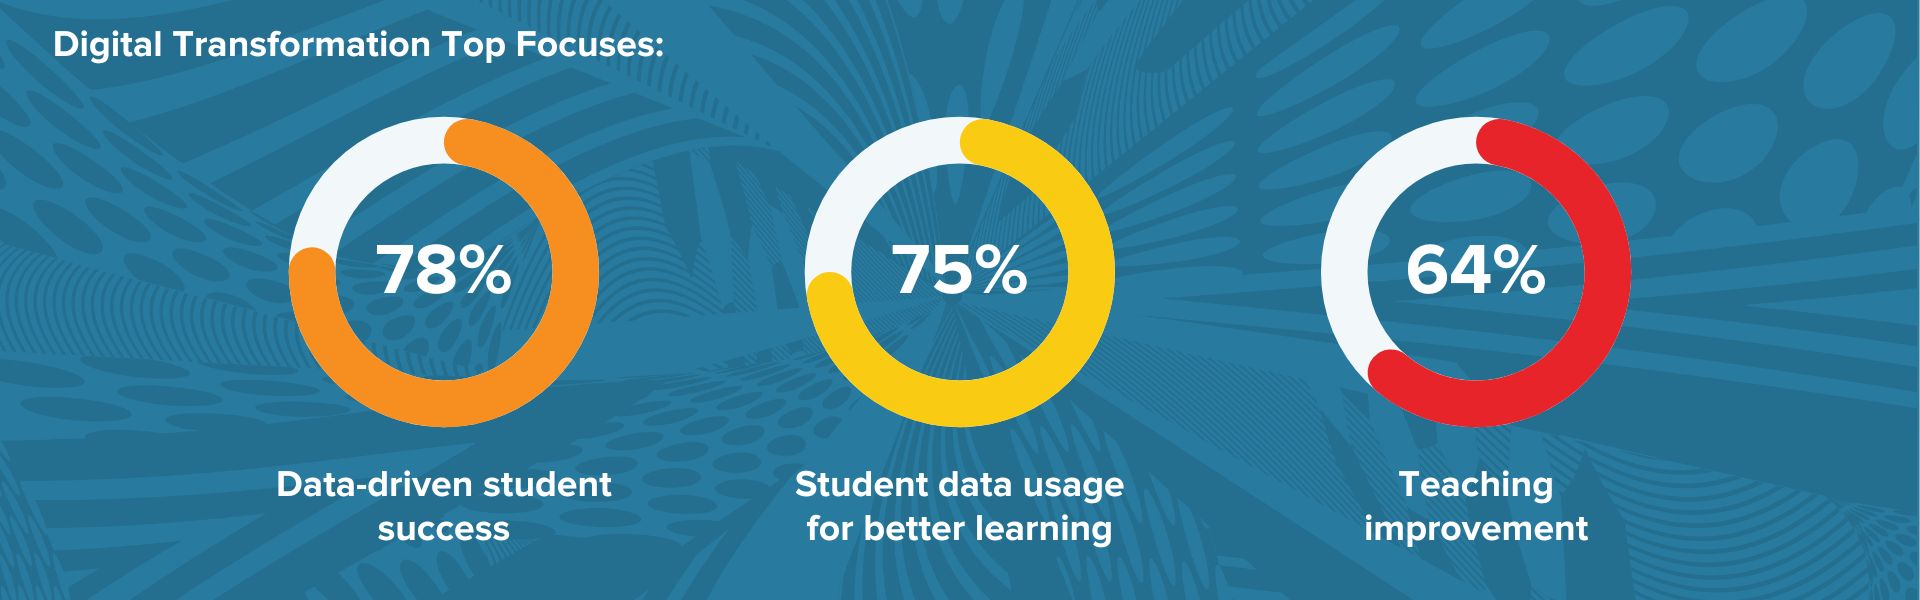 In terms of focus, institutions emphasize data-driven student success (78%), student data usage for better learning (75%), and teaching improvement (64%). 